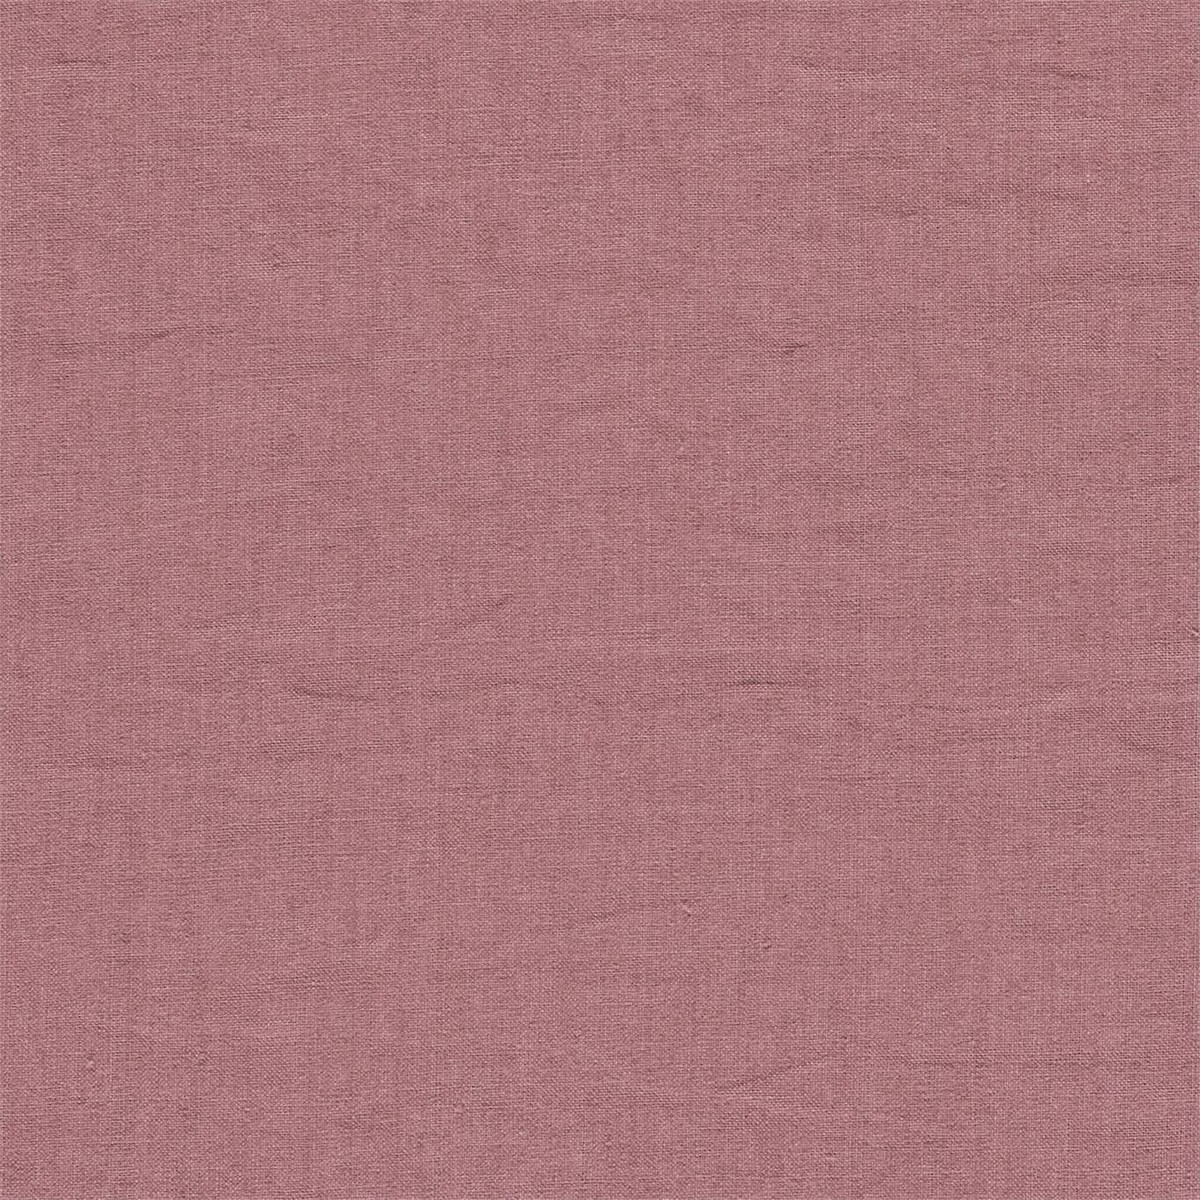 Rue Linen Coral Fabric by Sanderson